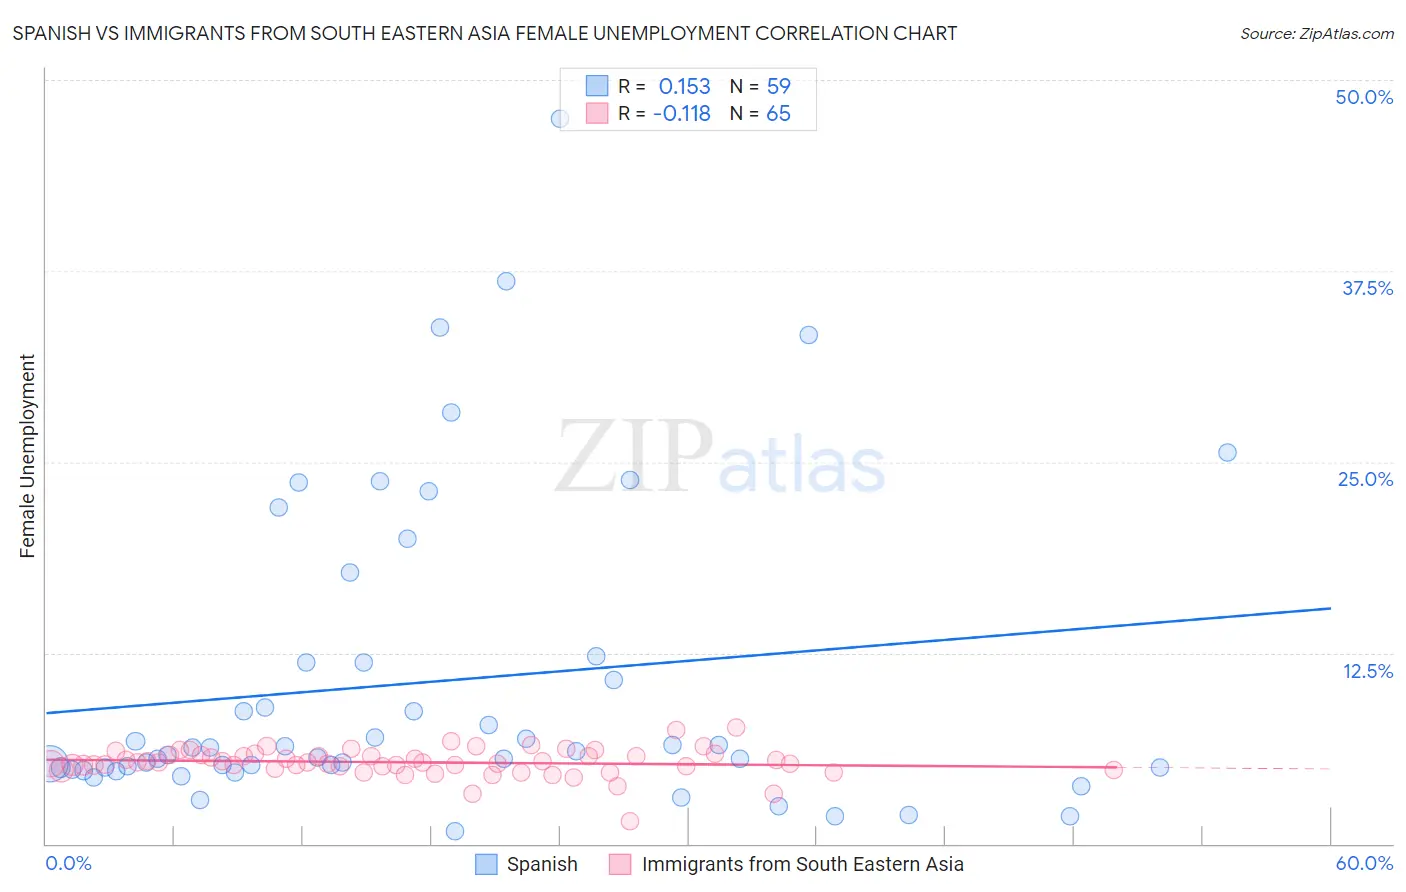 Spanish vs Immigrants from South Eastern Asia Female Unemployment